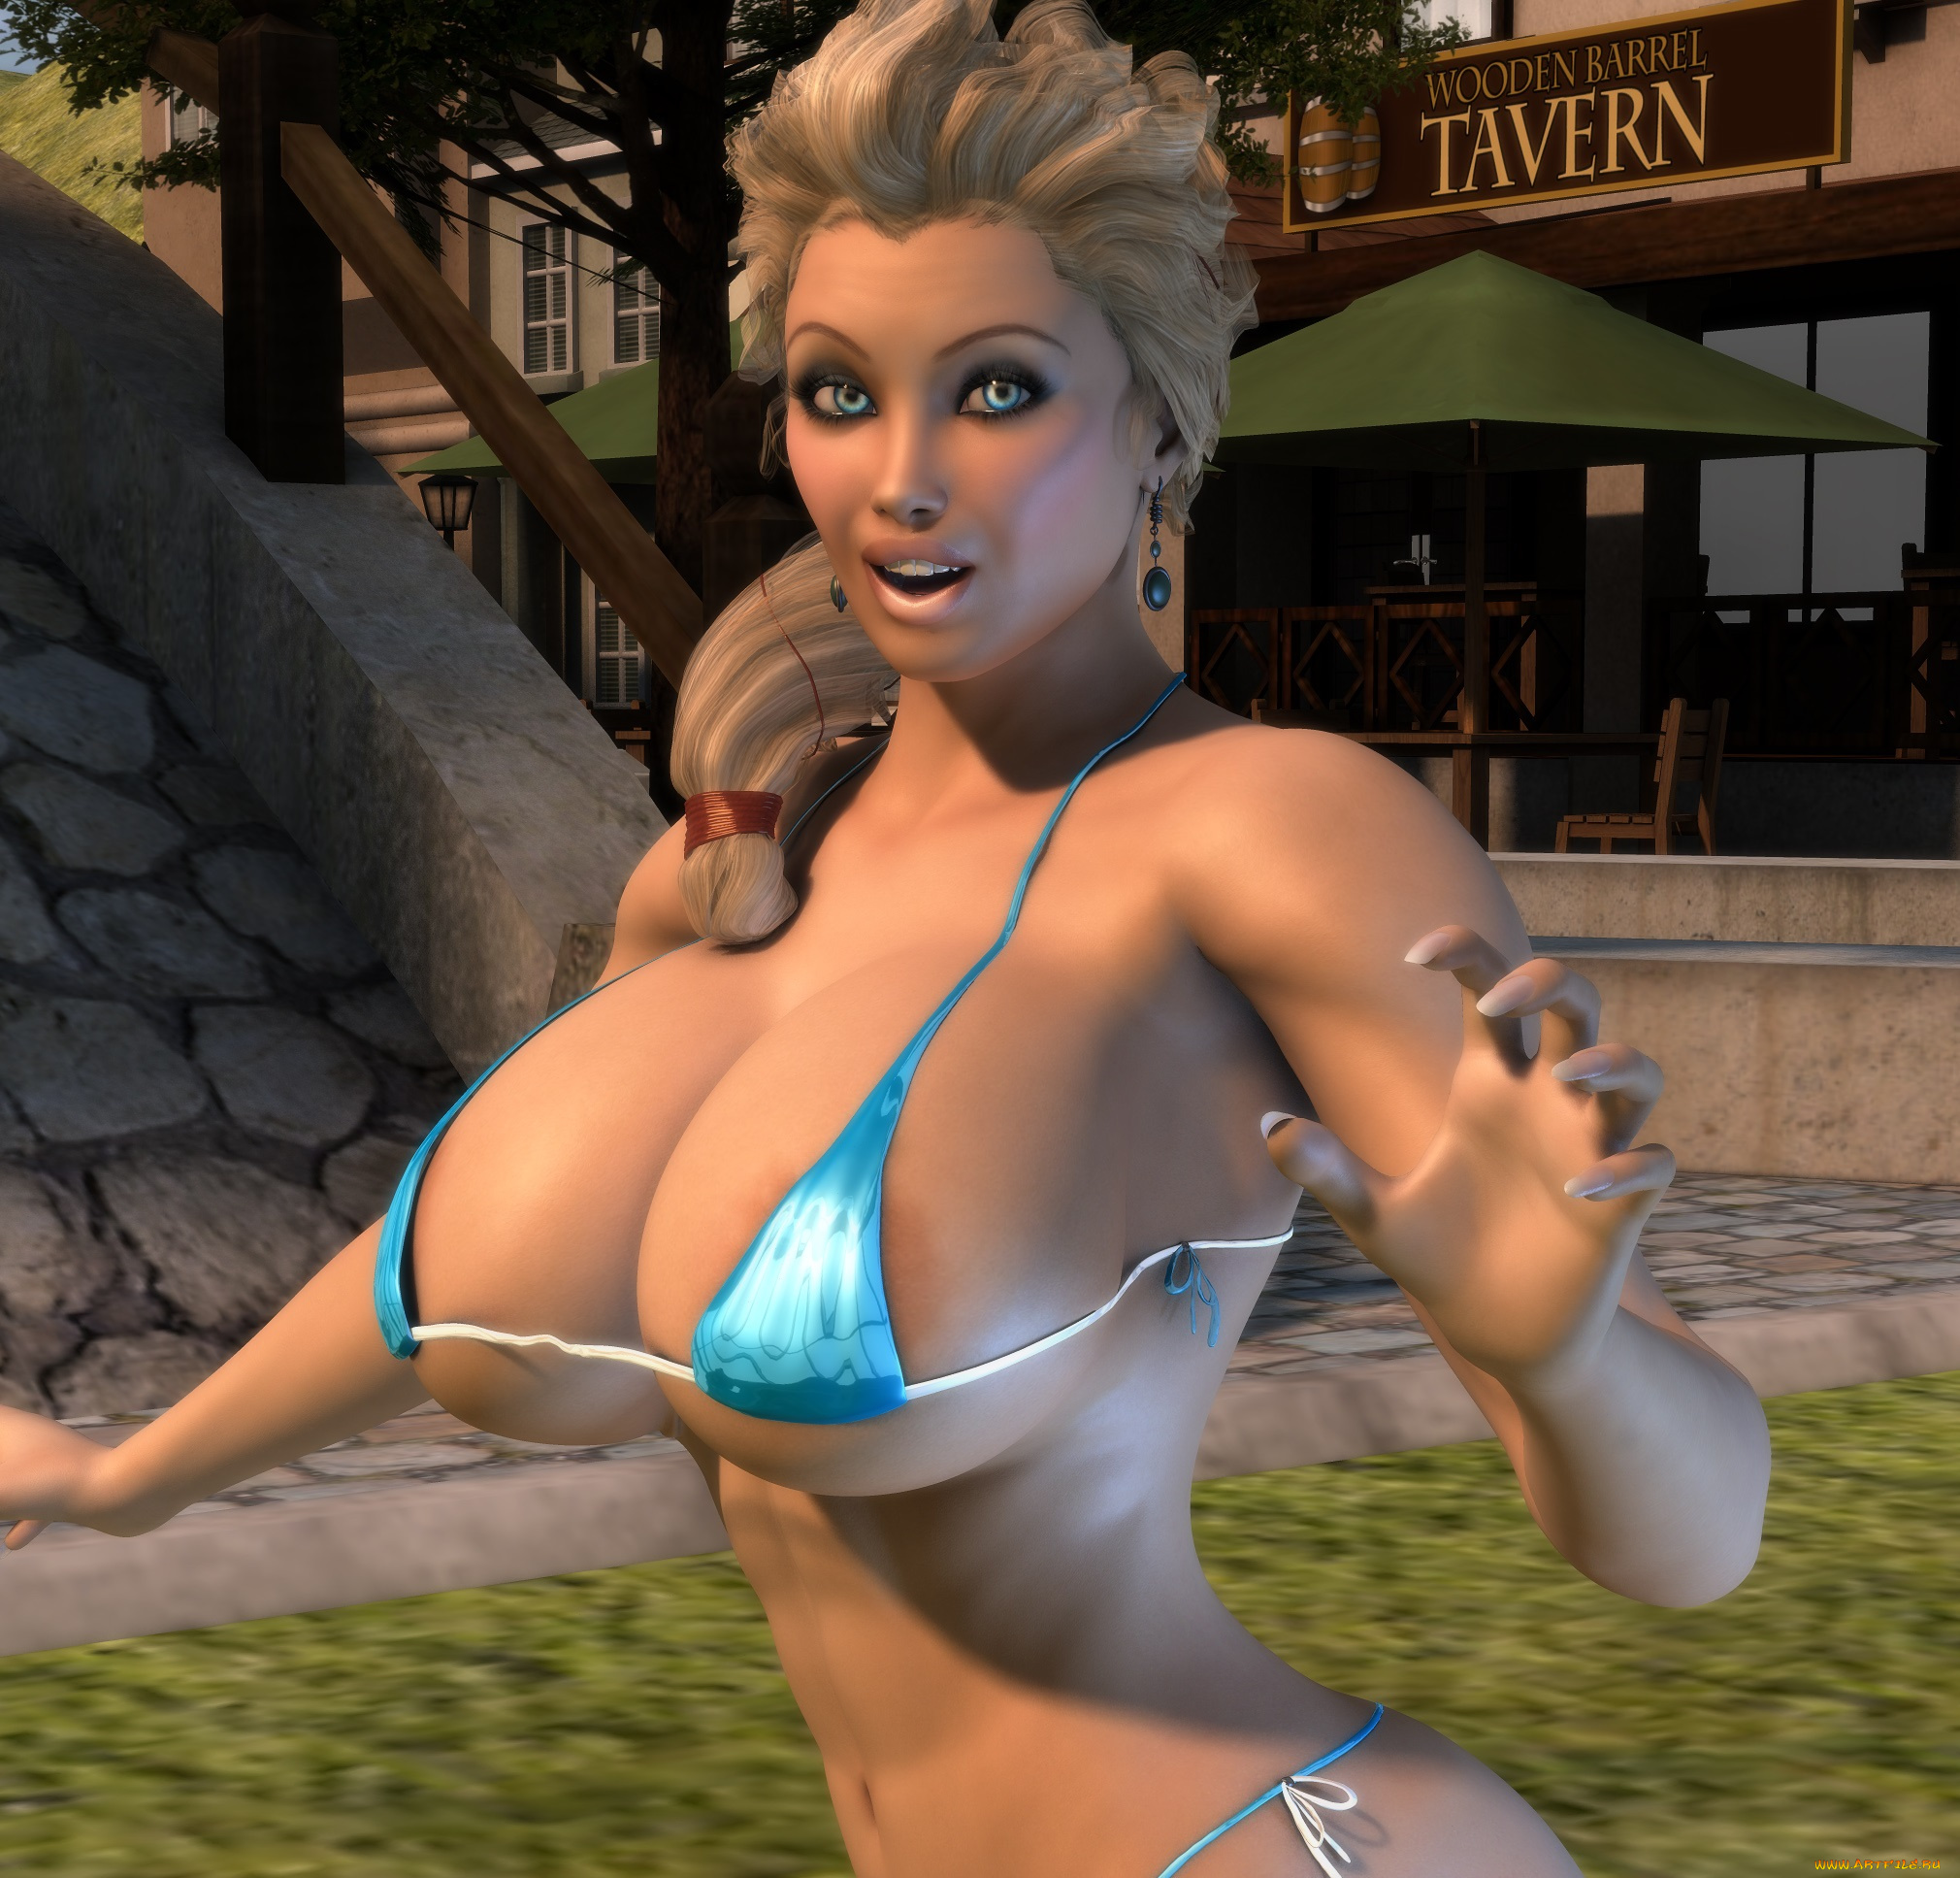 Top tits in photo games